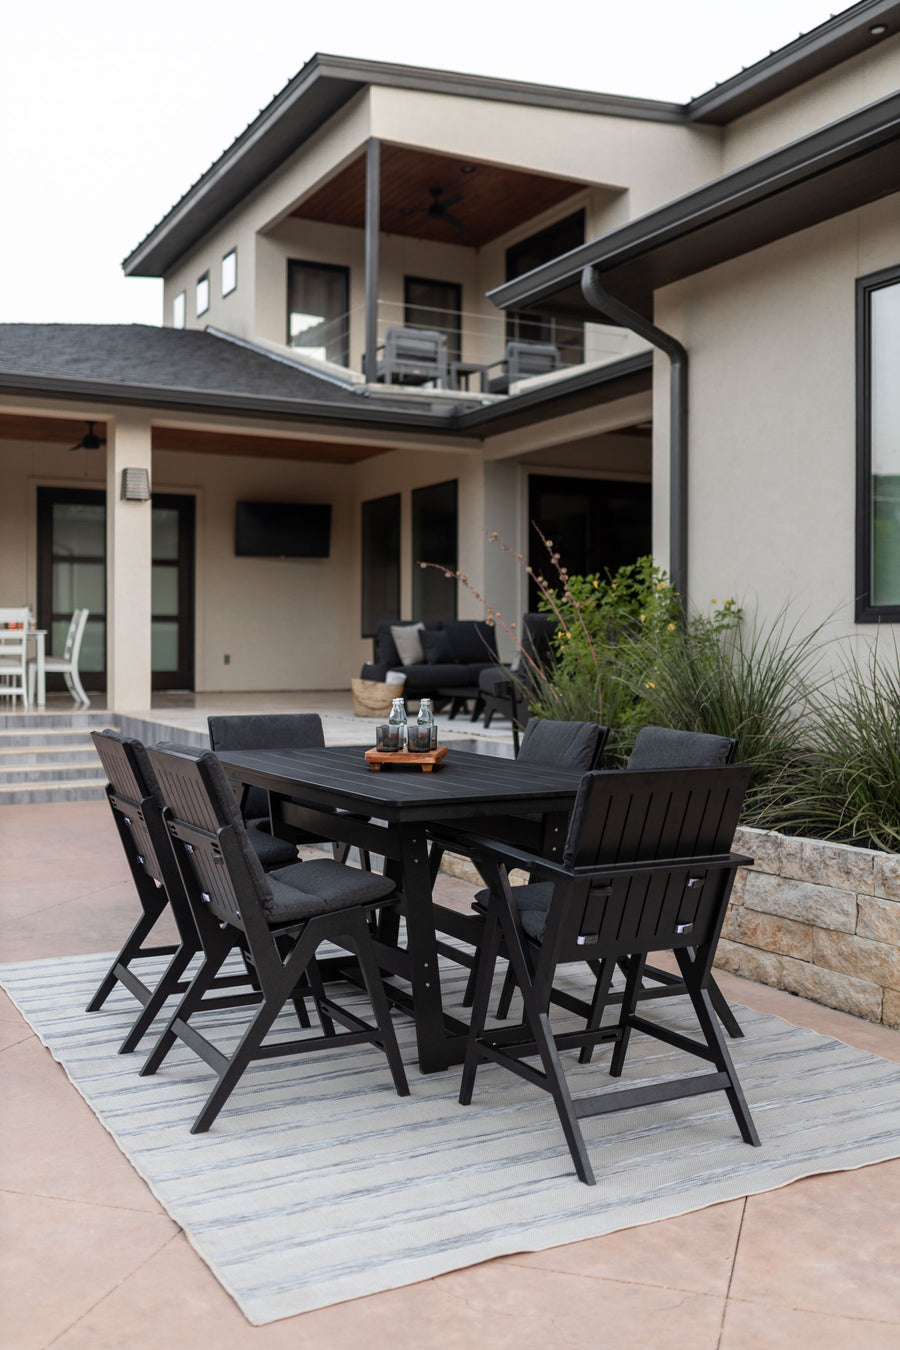 Modern black outdoor dining furniture set on a stone patio with a striped area rug, featuring a sleek table and six chairs, in front of a contemporary two-story house.